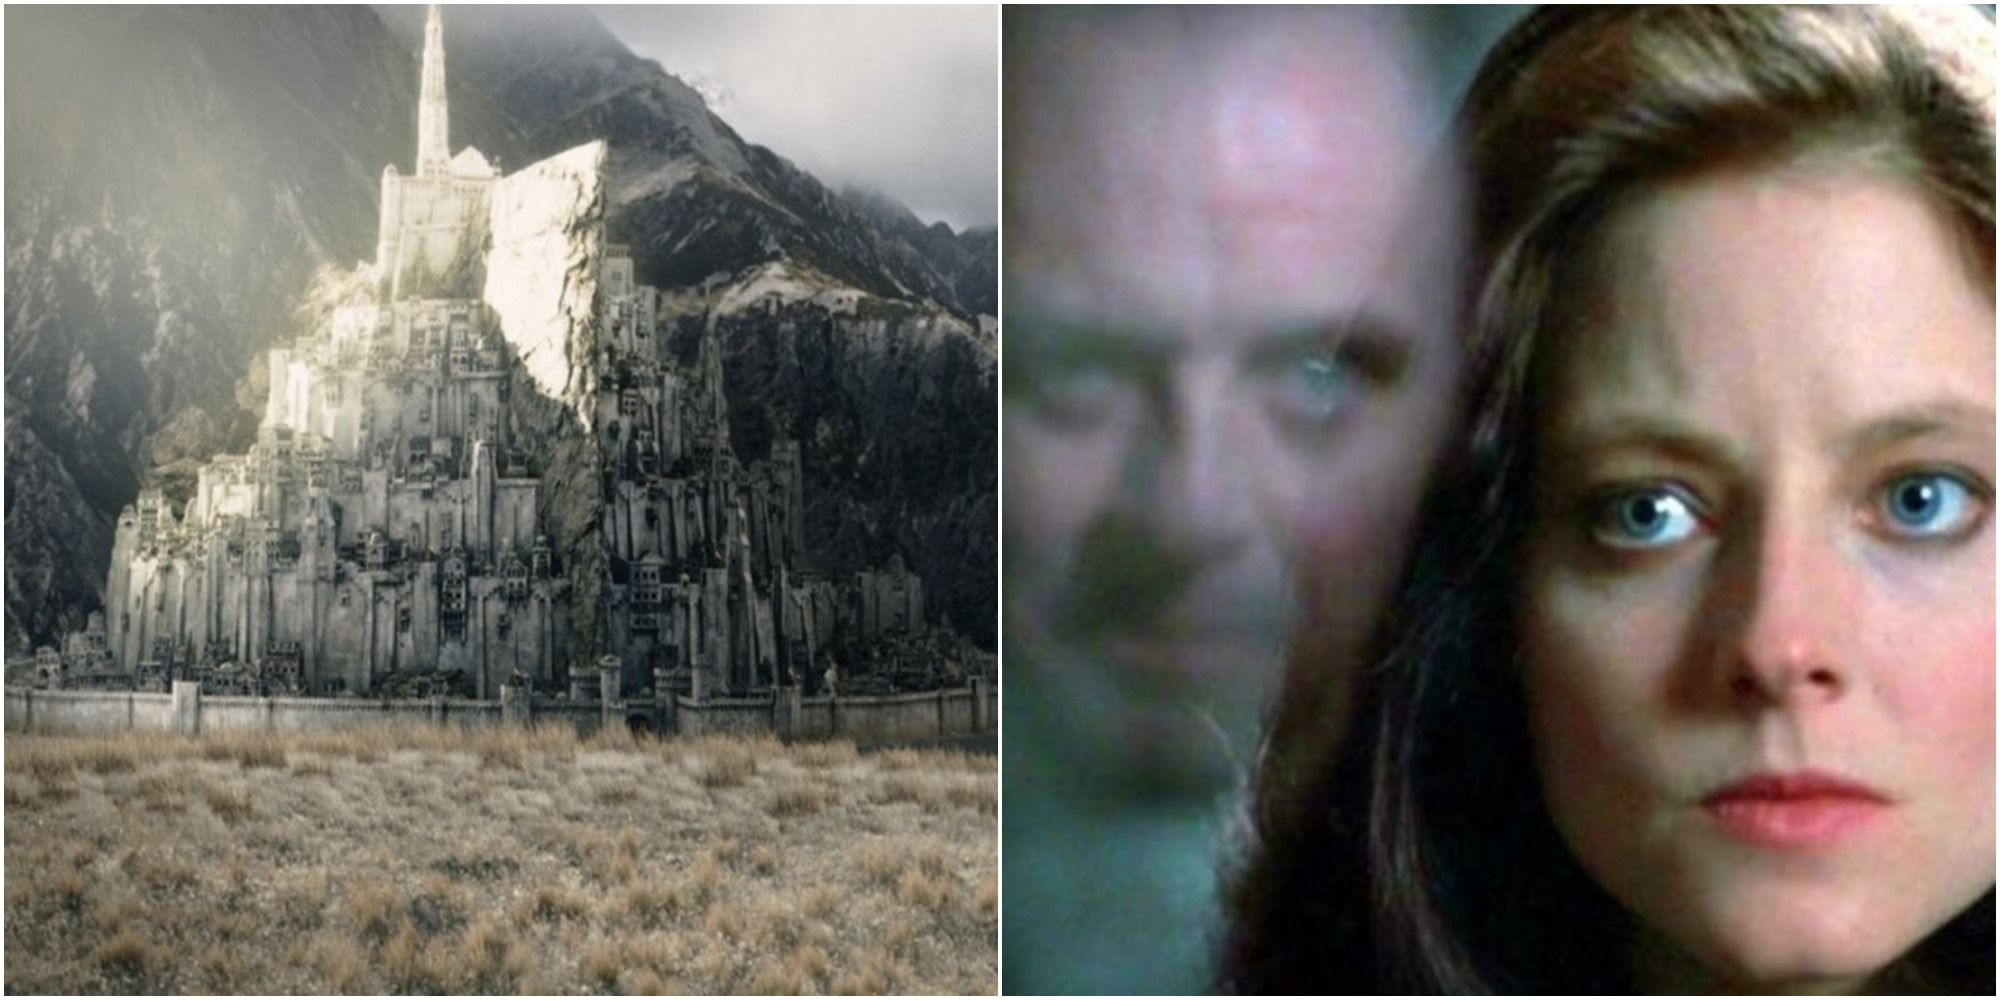 Split Image showing stills from LOTR and Silence of the Lambs